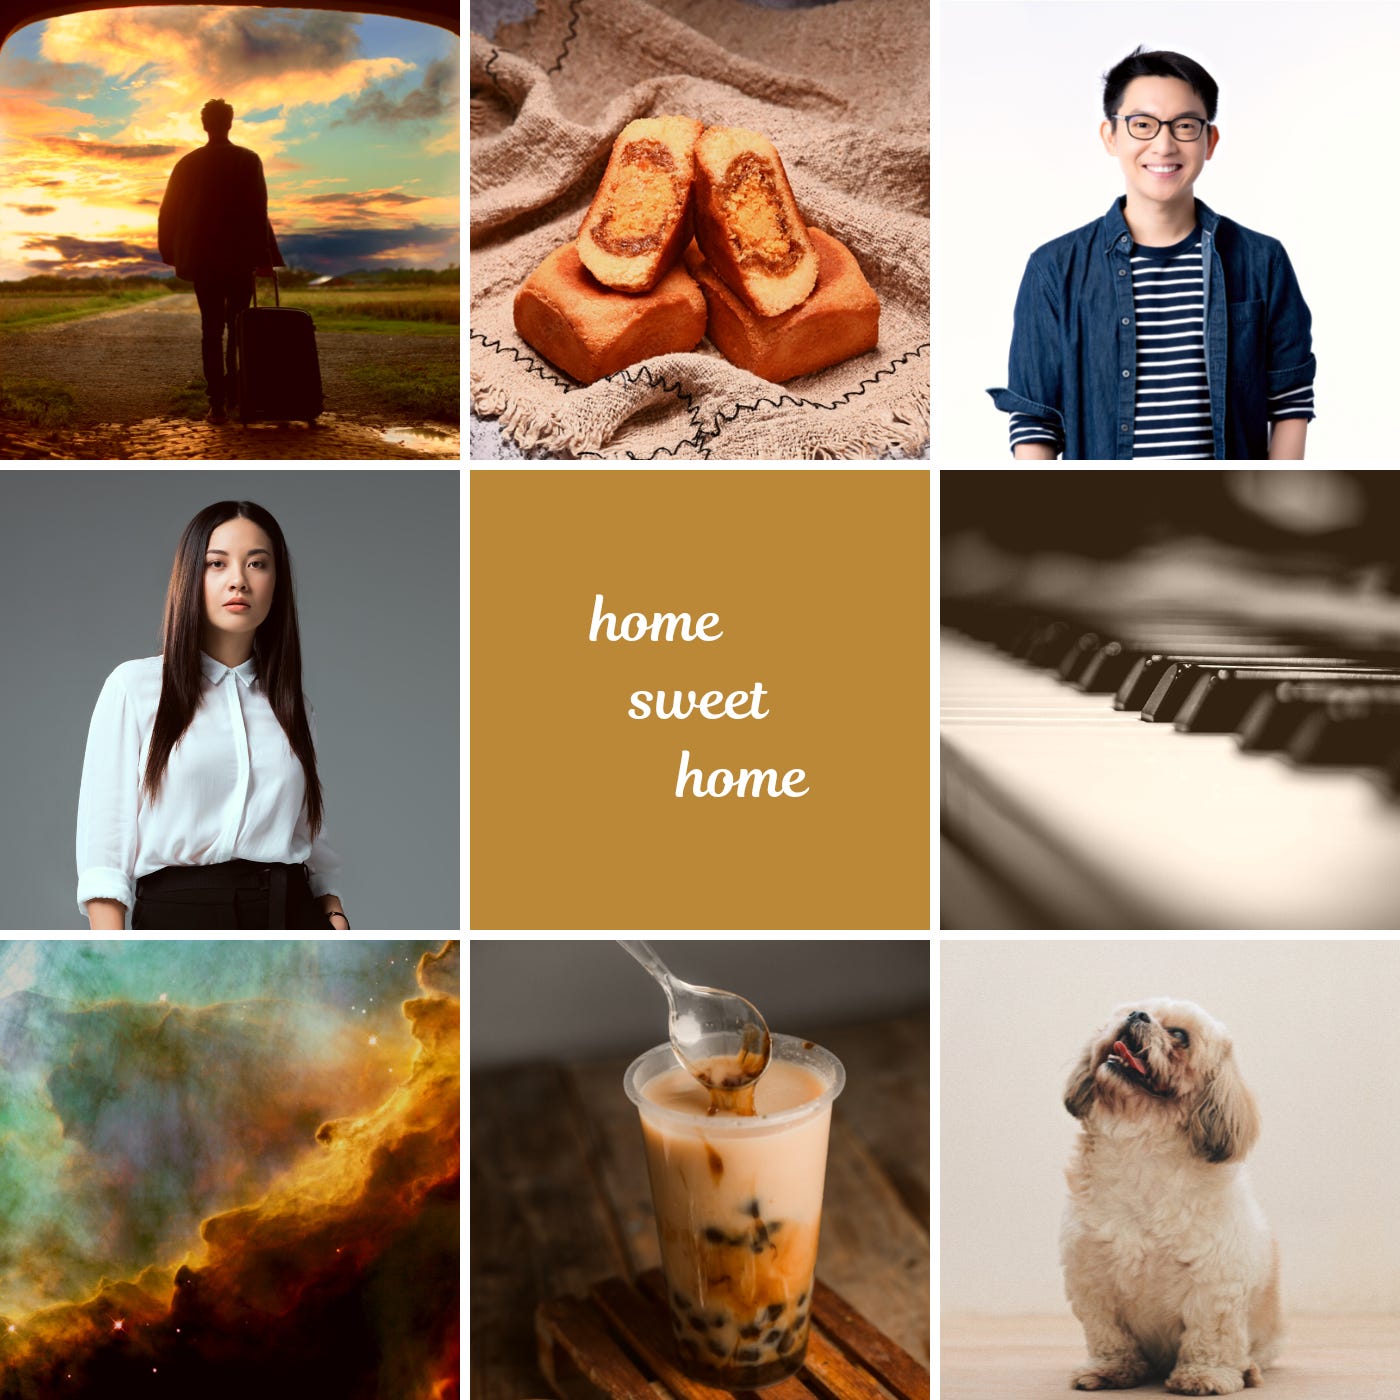 From top-left in clockwise order: silhouette of a traveler, pineapple cakes with salted egg yolks, a smiling Yen-Chen, piano keys, Milk Puff looking up, a cup of boba with black sugar on the spoon, nebula, cool Florence. Center text: home sweet home.